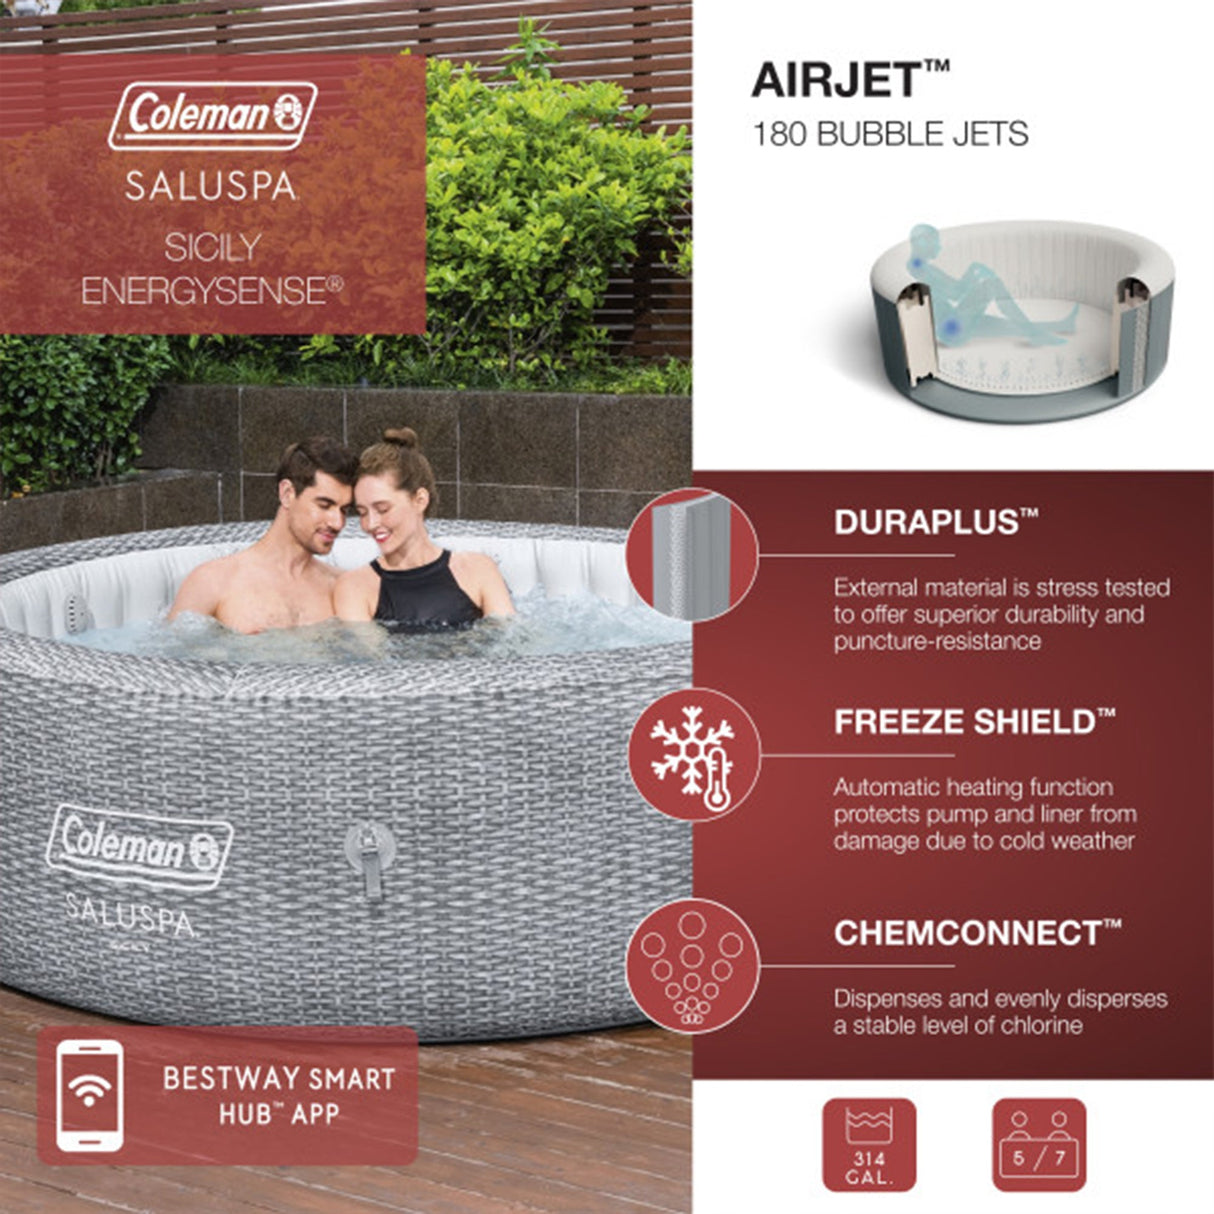 Bestway Coleman Sicily AirJet Inflatable Hot Tub With EnergySense Cover, Grey